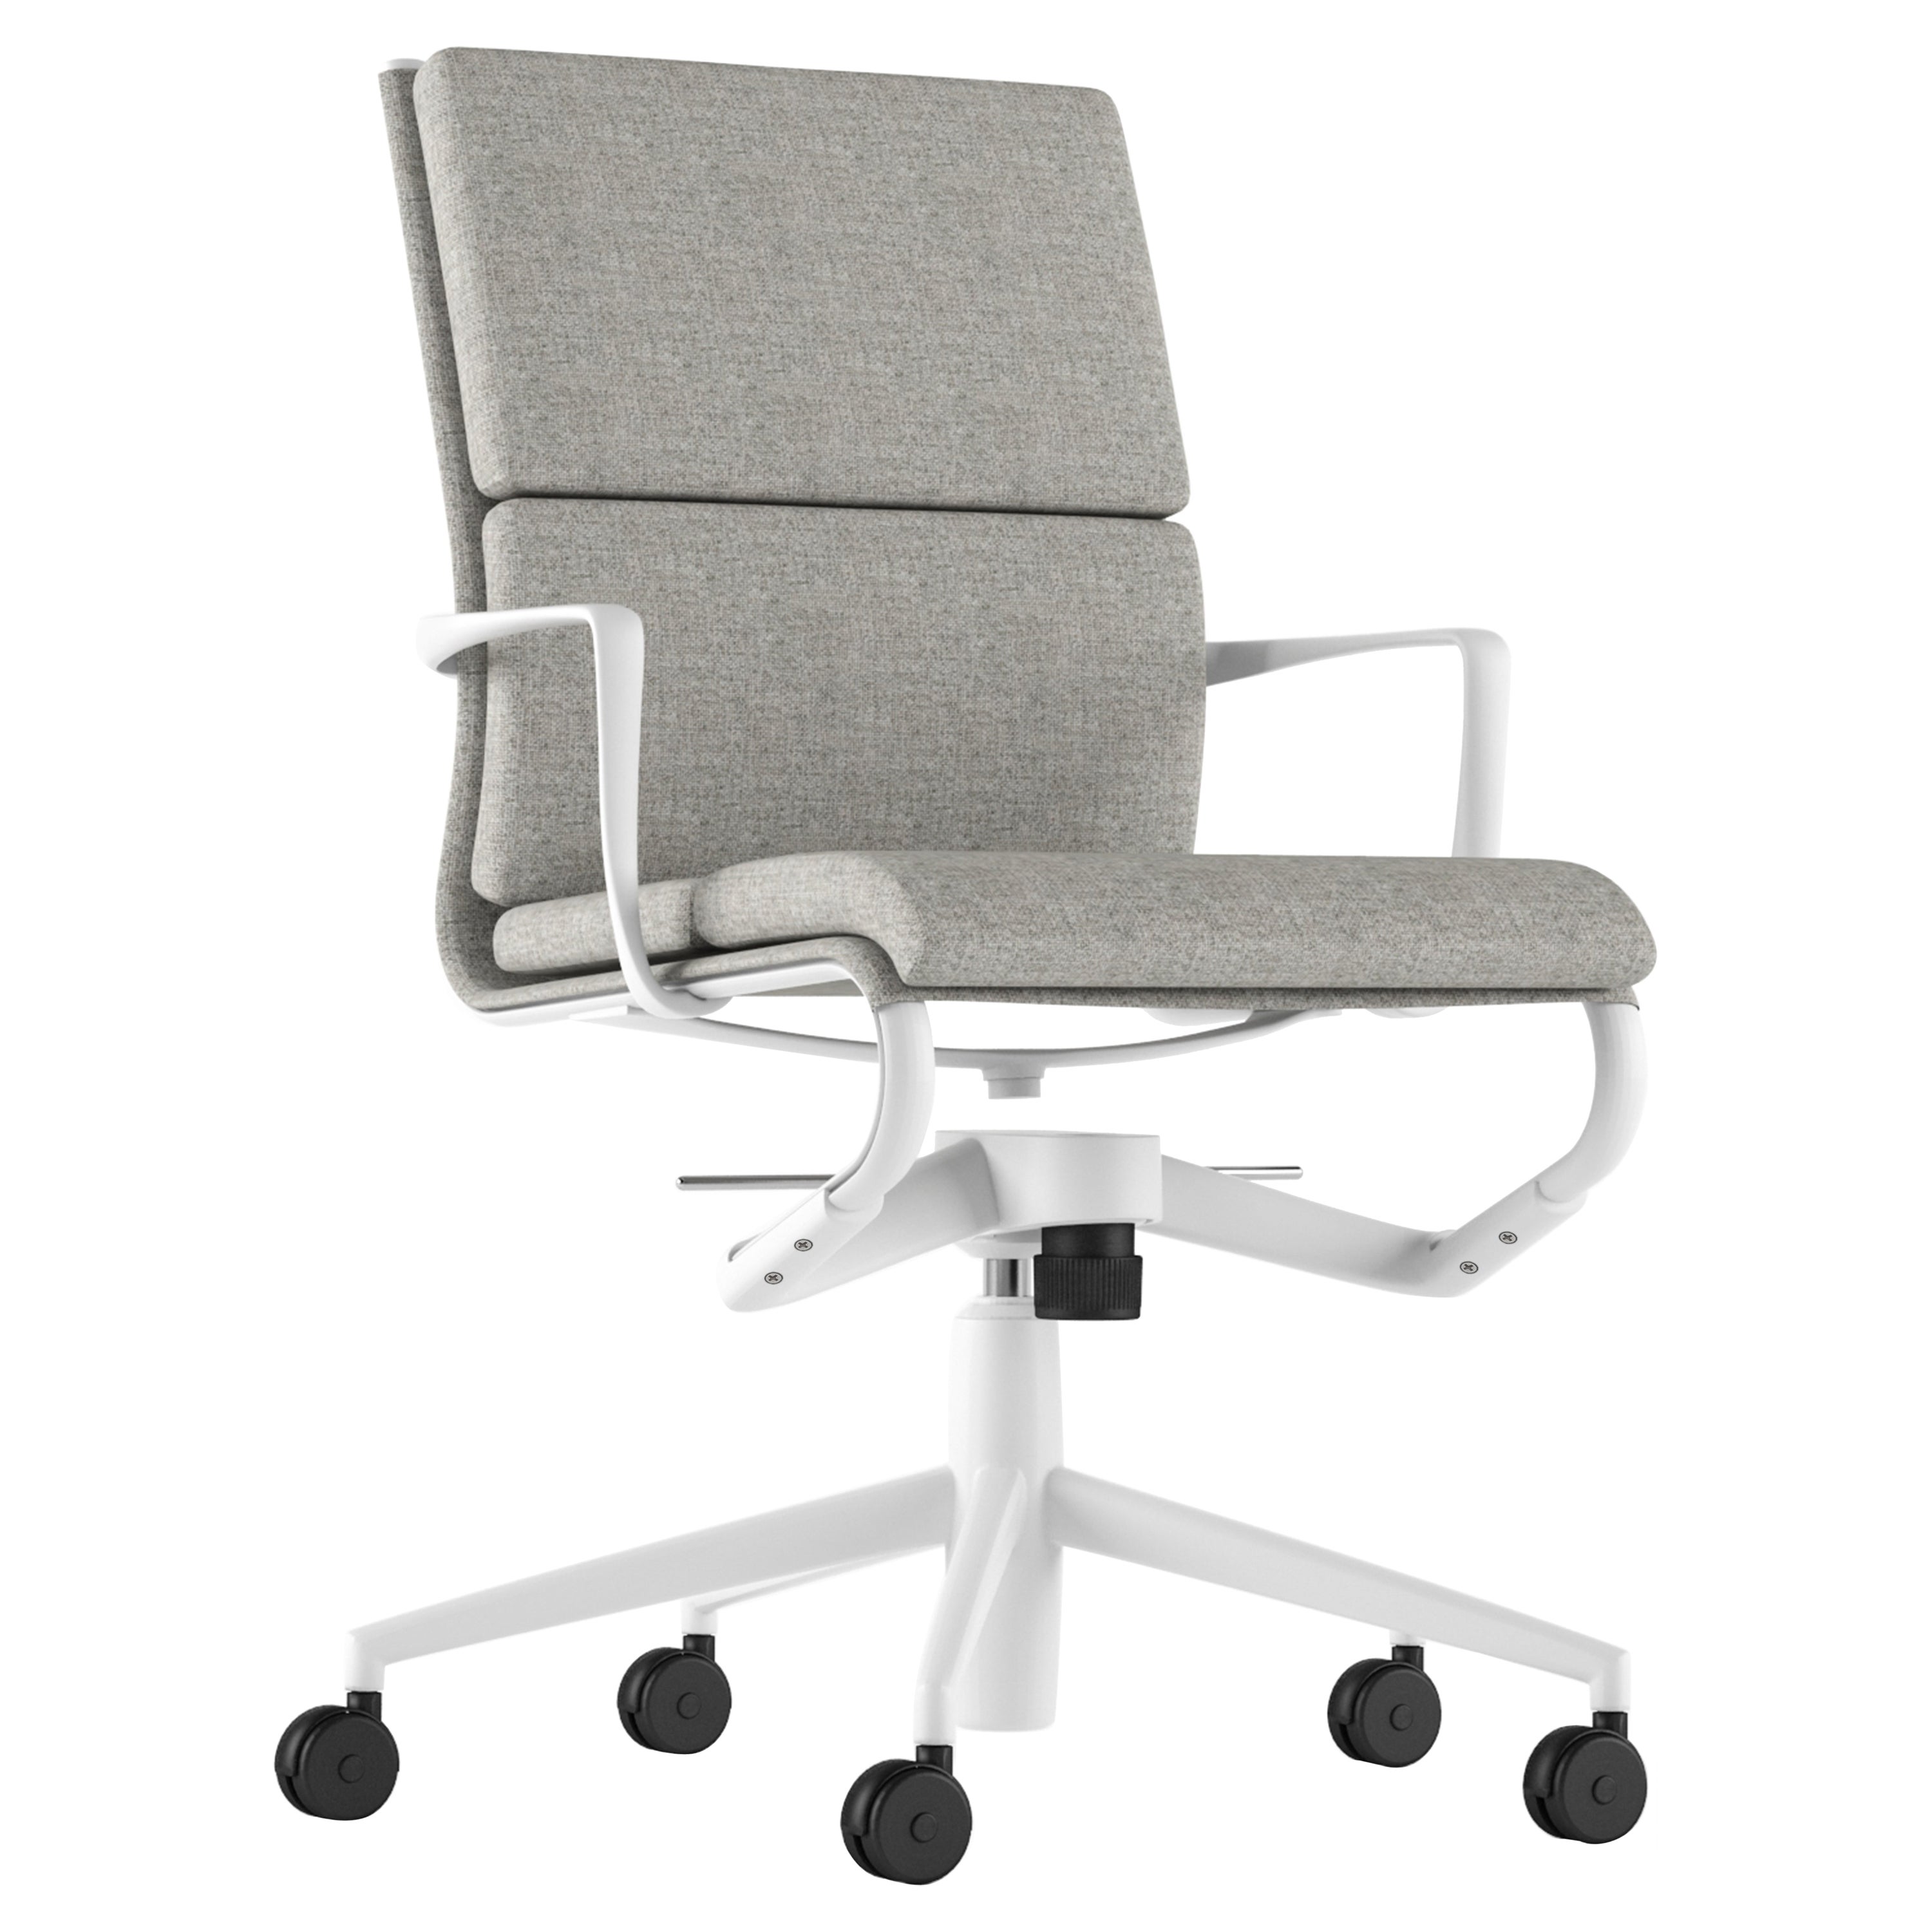 Alias 453 Rollingframe+ Tilt 47 Soft Chair in Grey w Lacquered Aluminum Frame For Sale